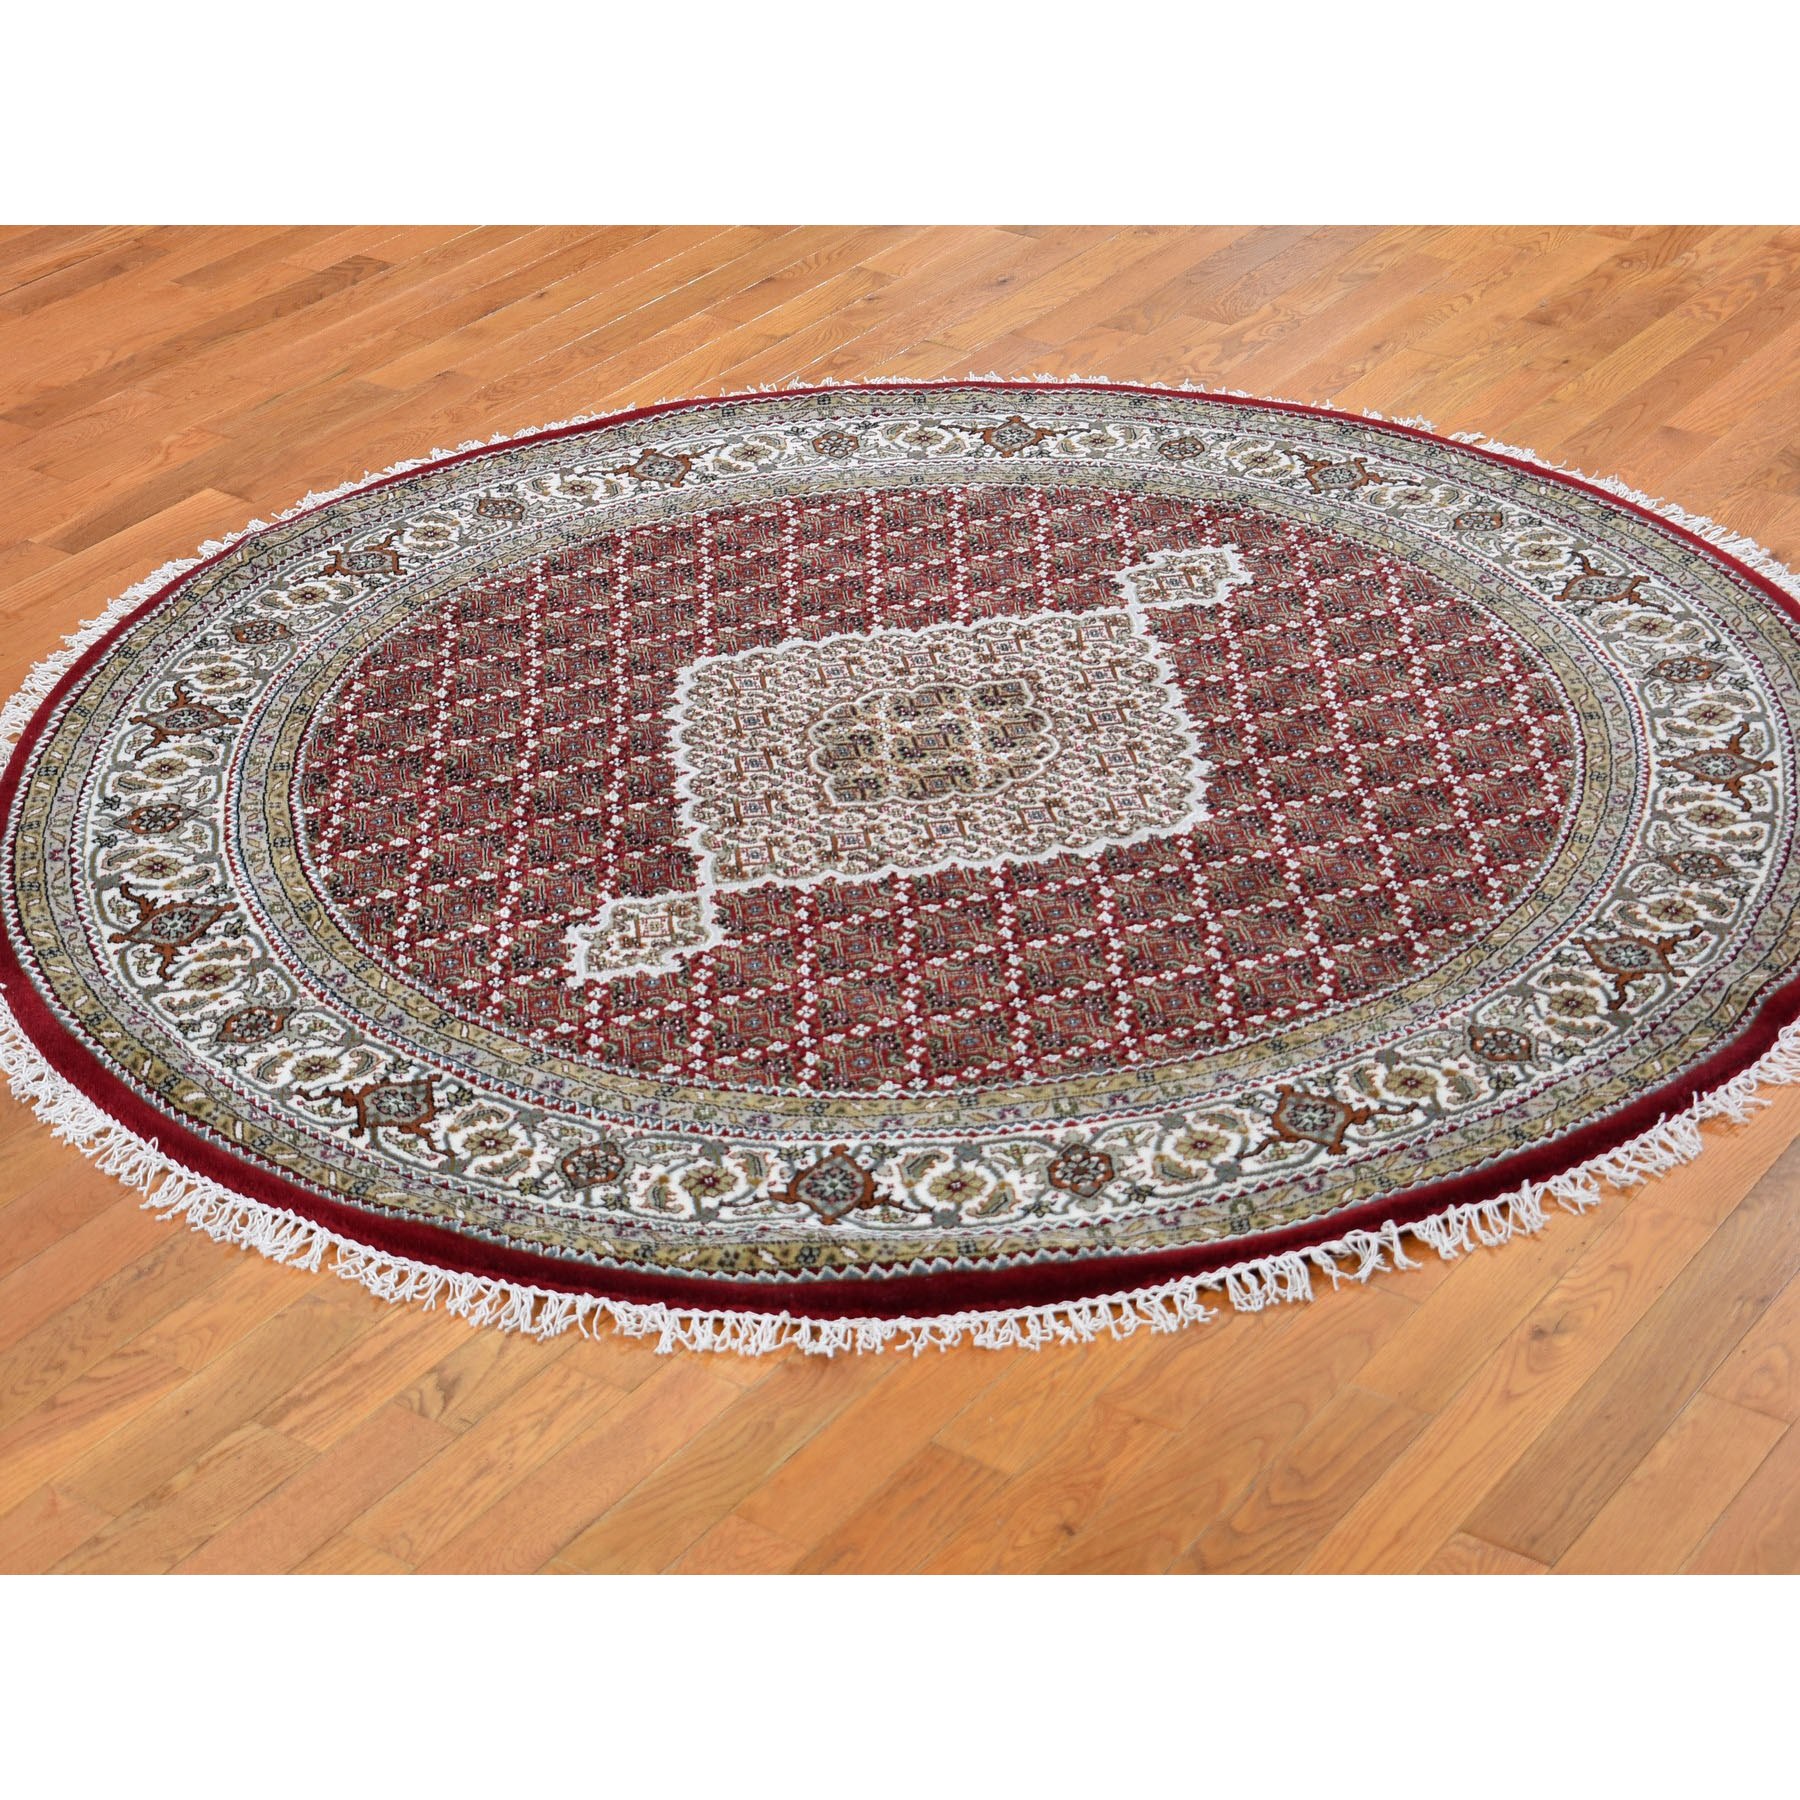 6-8 x6-8  Round Red Tabriz Mahi Wool and Silk Hand Knotted Oriental Rug 